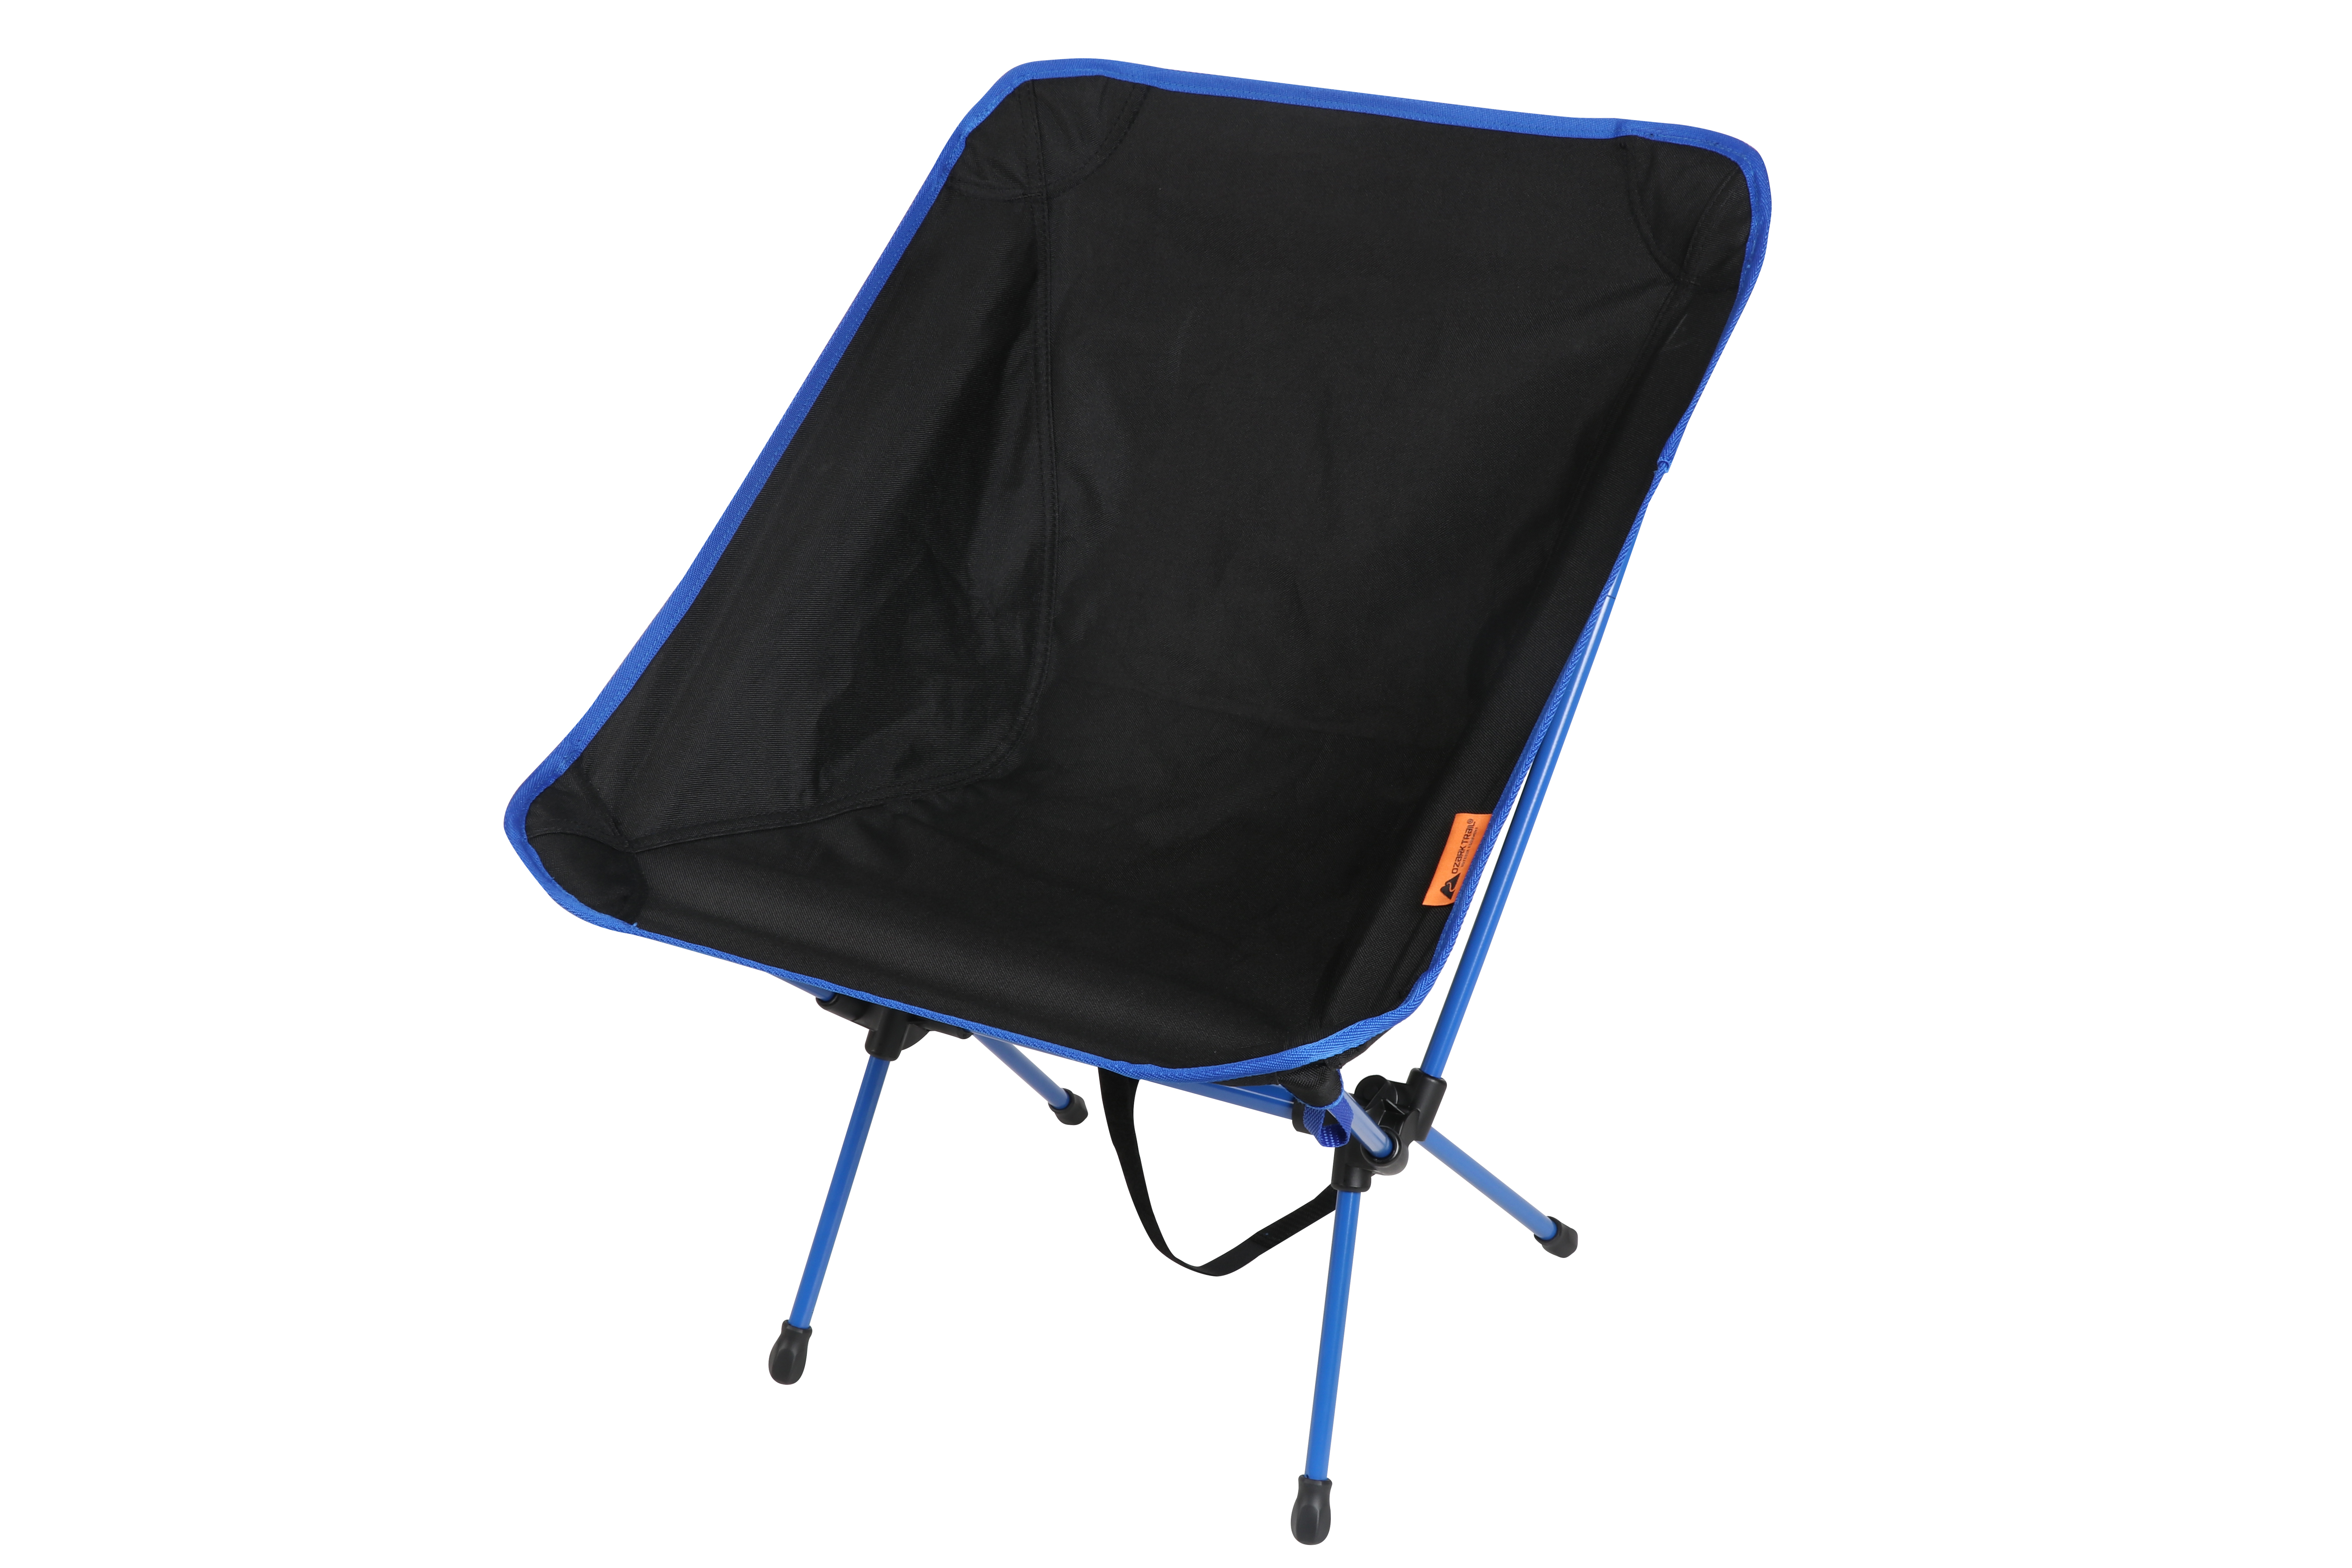 Ozark Trail Outdoor Compact Backpacking Chair, Black, 3lbs, Adult - image 2 of 3